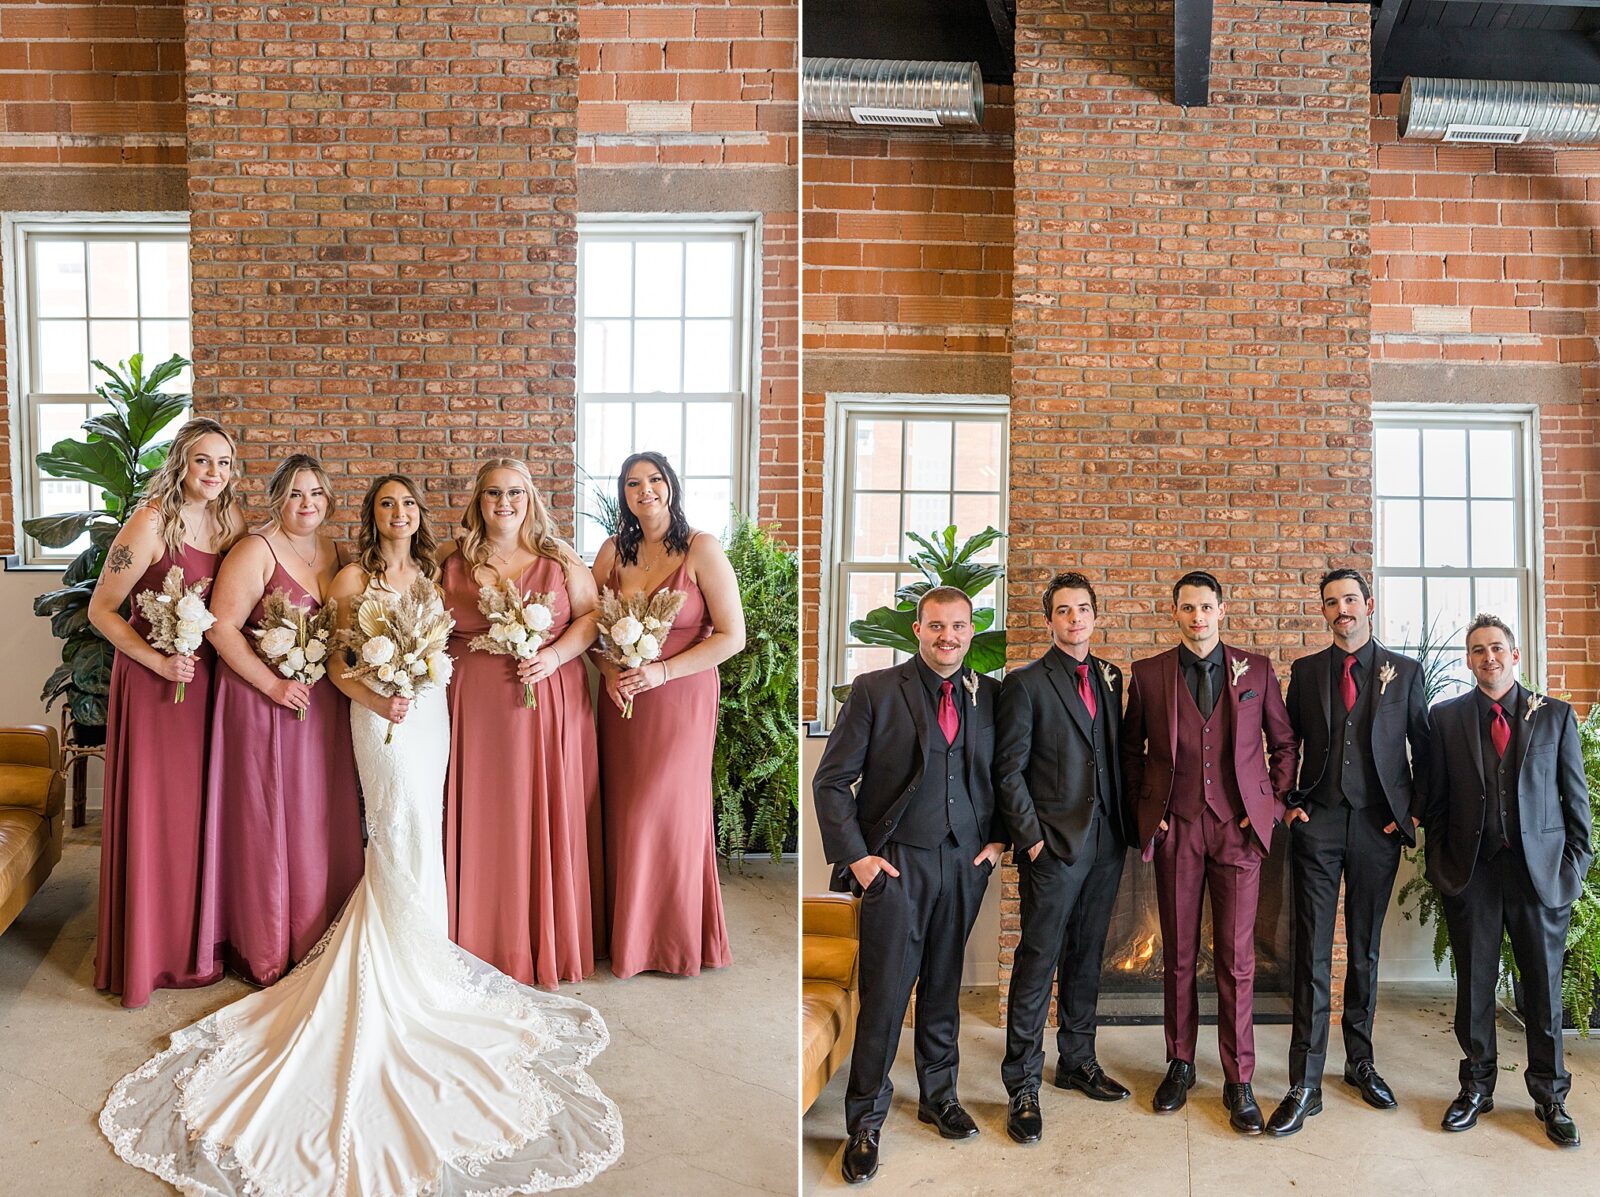 Wedding Party and Bride and Groom photos at The Every Day Kitchen in Regina, Sask